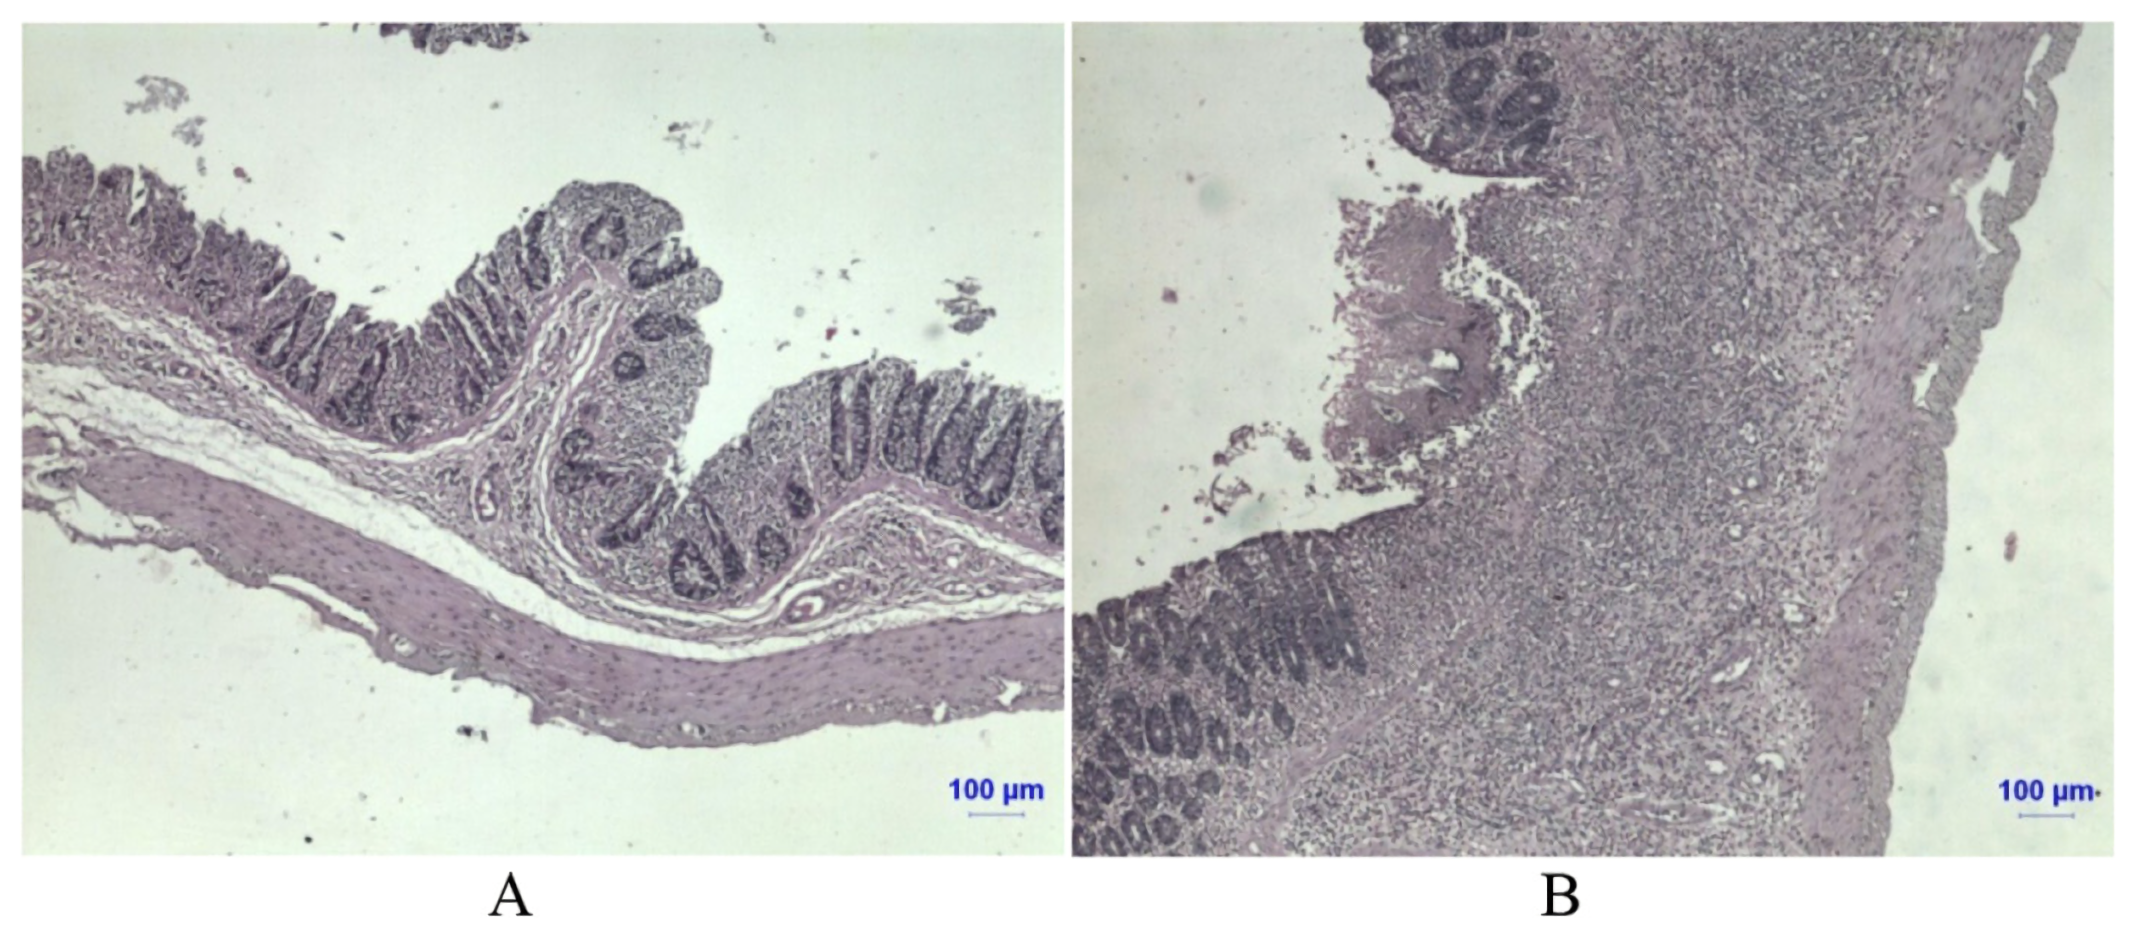 Indomethacin-Induced Rodent Inflammation in Small Intestine